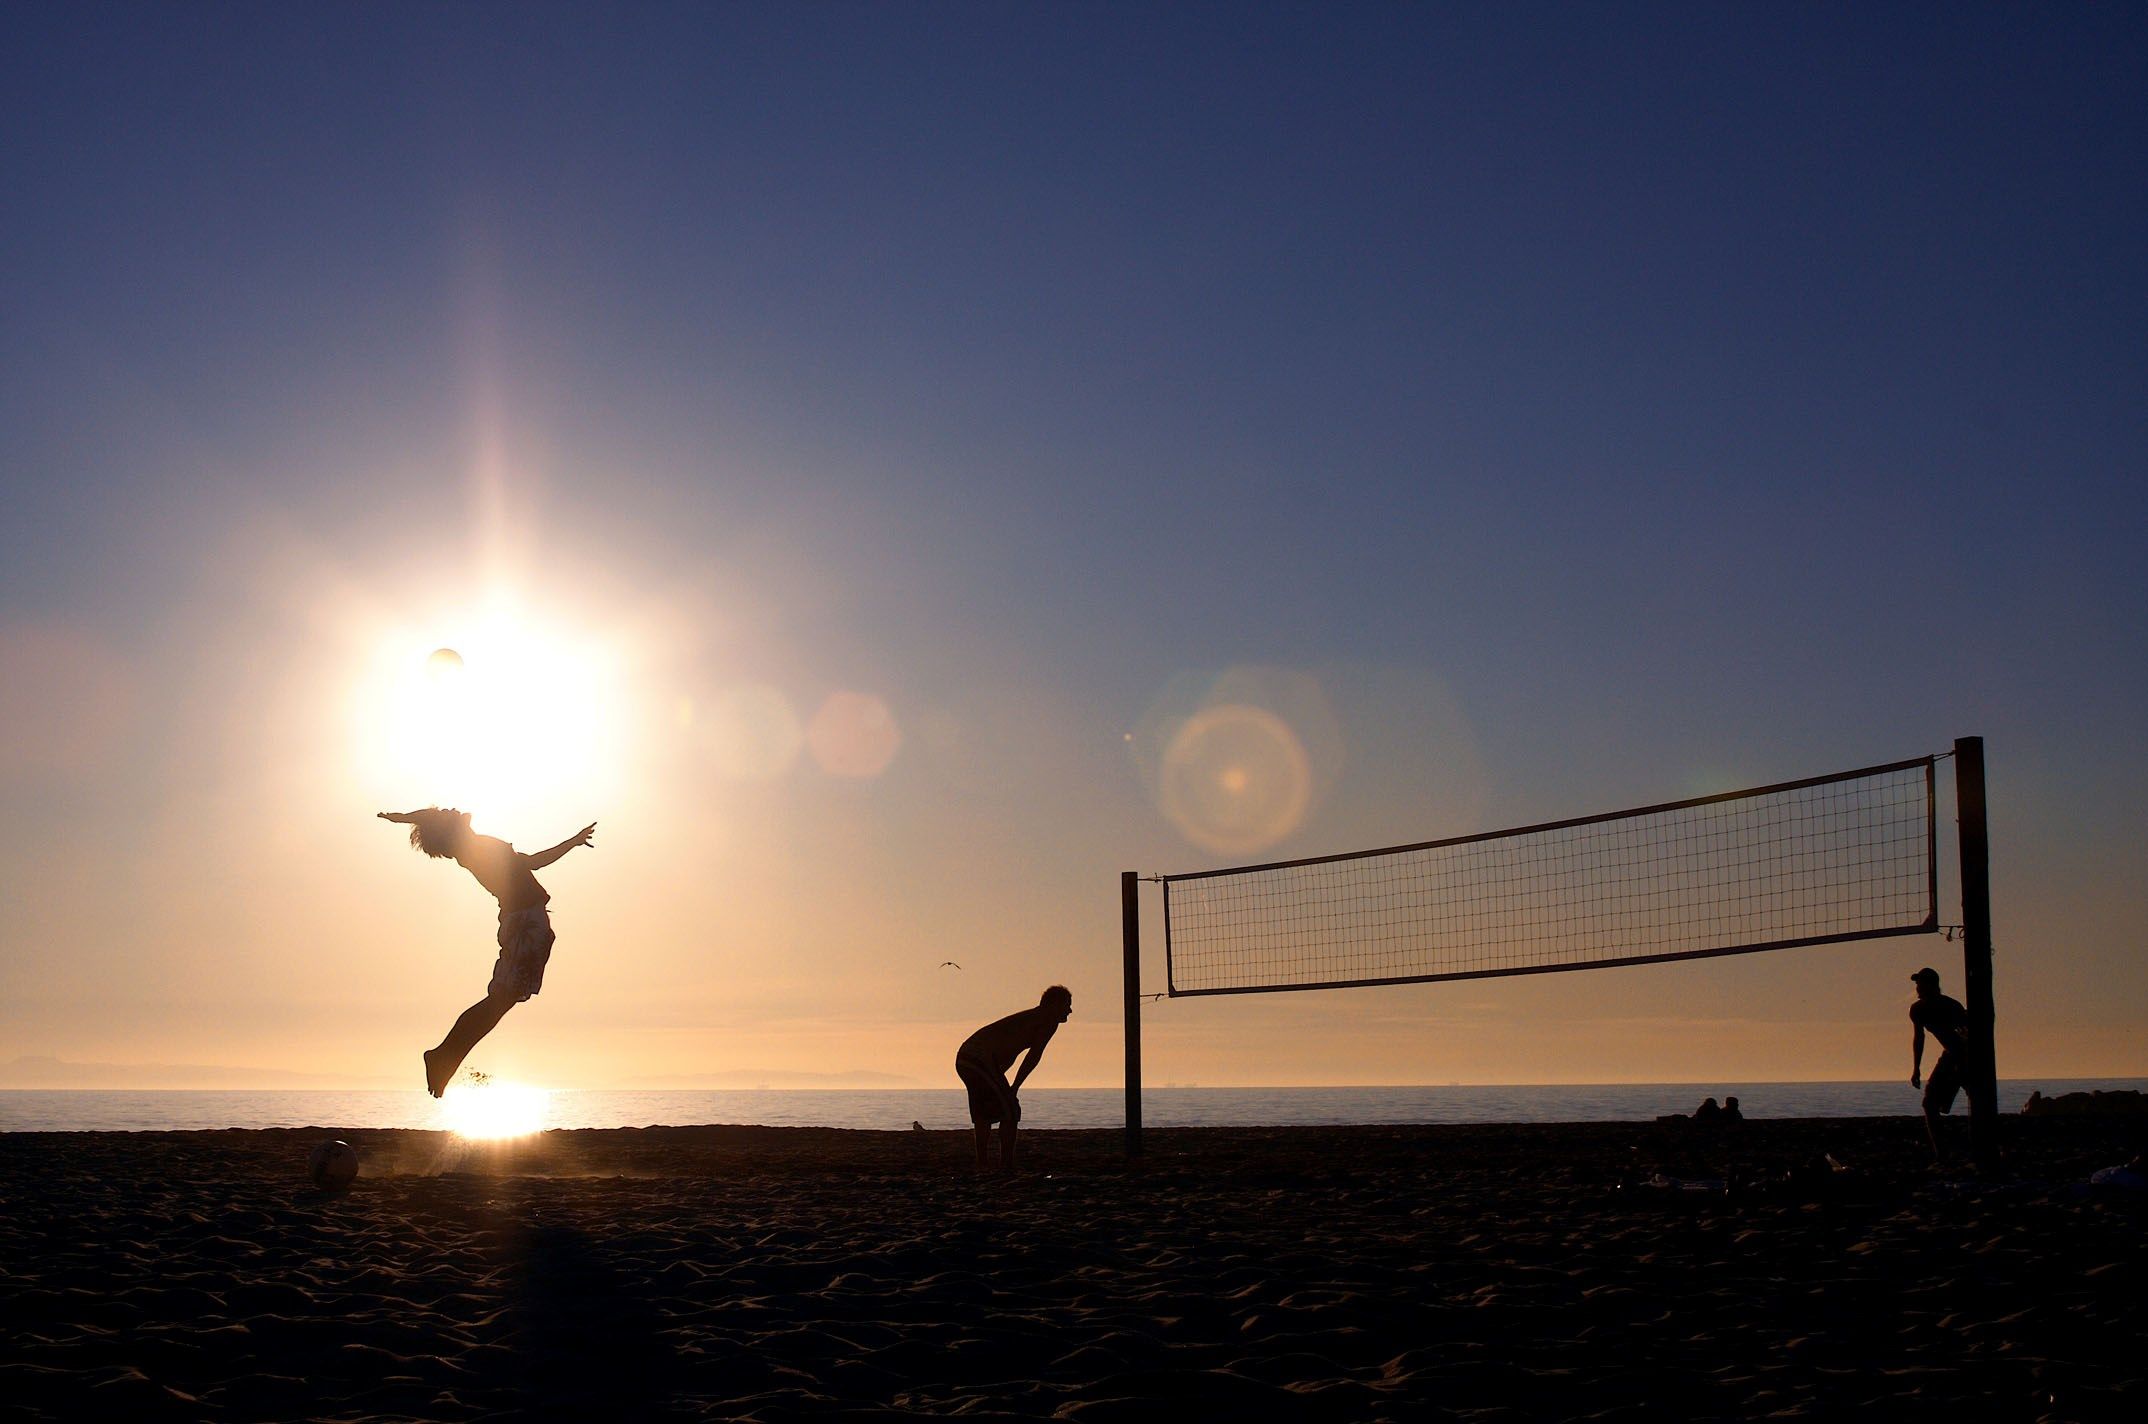 Volleyball Wallpaper  Volleyball wallpaper Volleyball photography  Volleyball inspiration